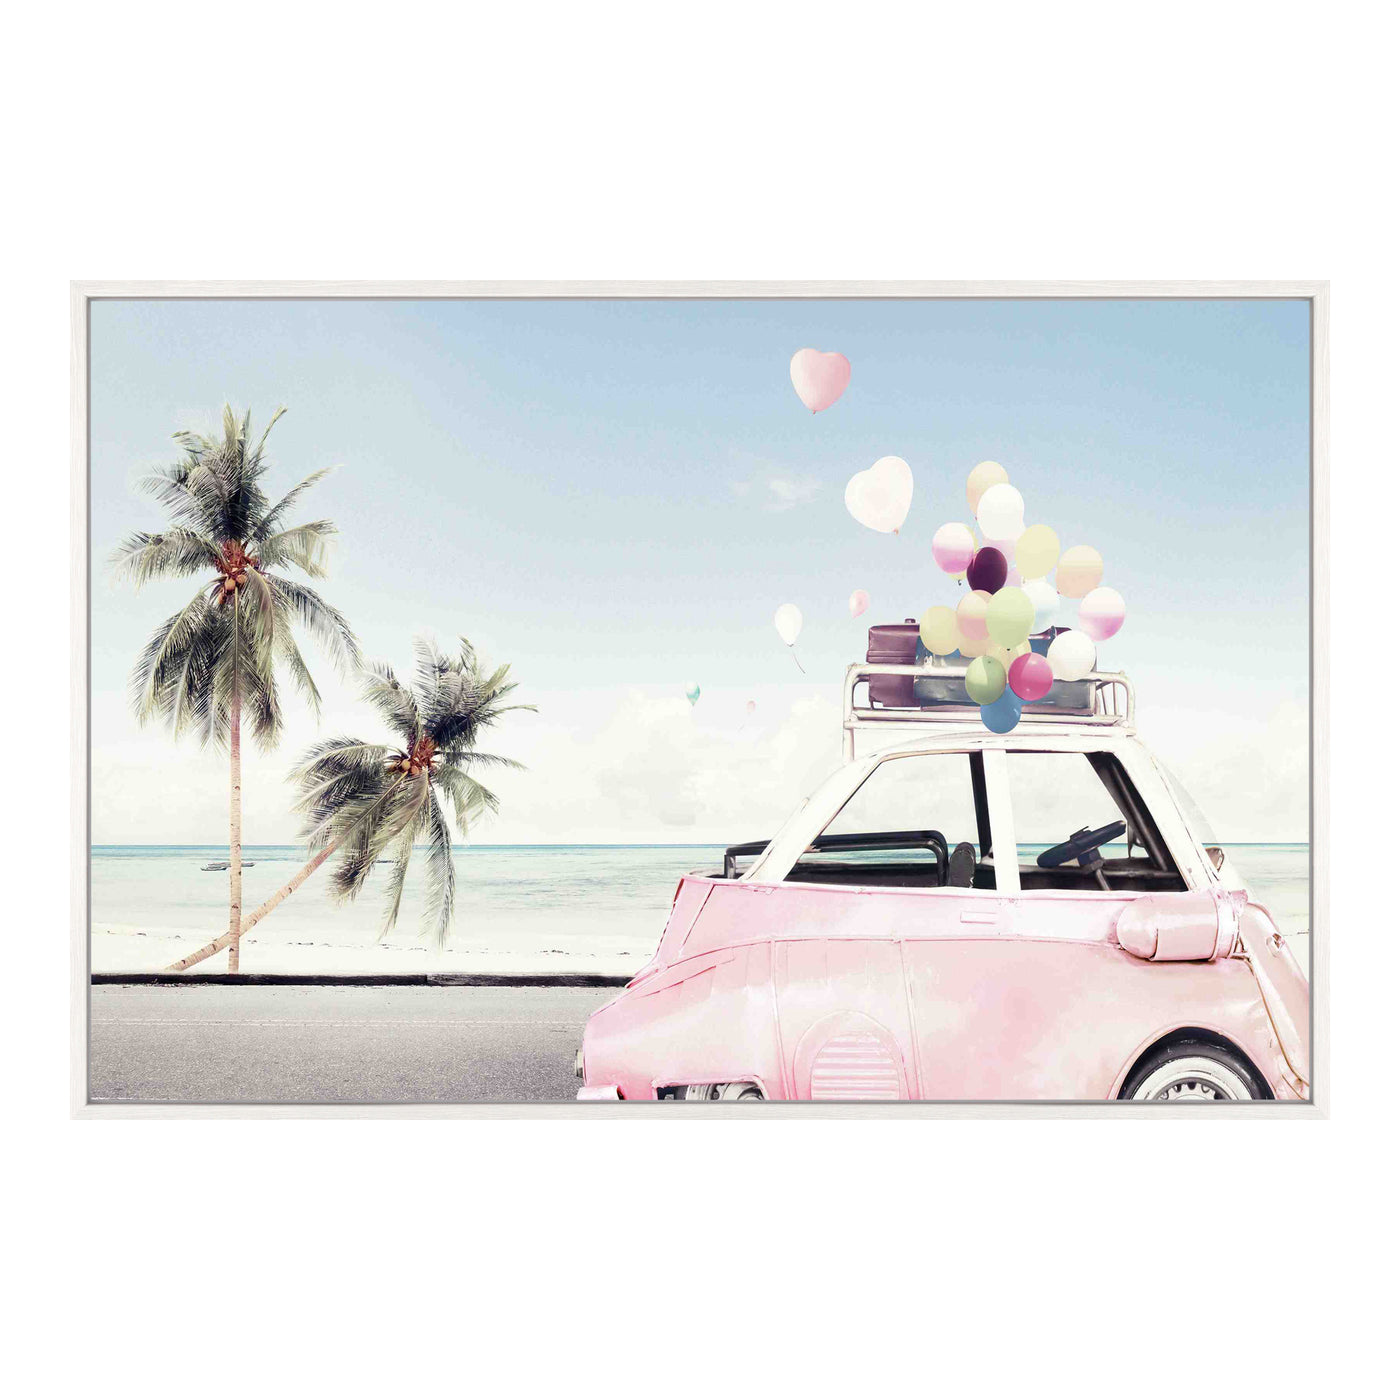 There's a party, and of course, you're invited. The Beach Party wall decor features a fantastic subject with blue skies, p...